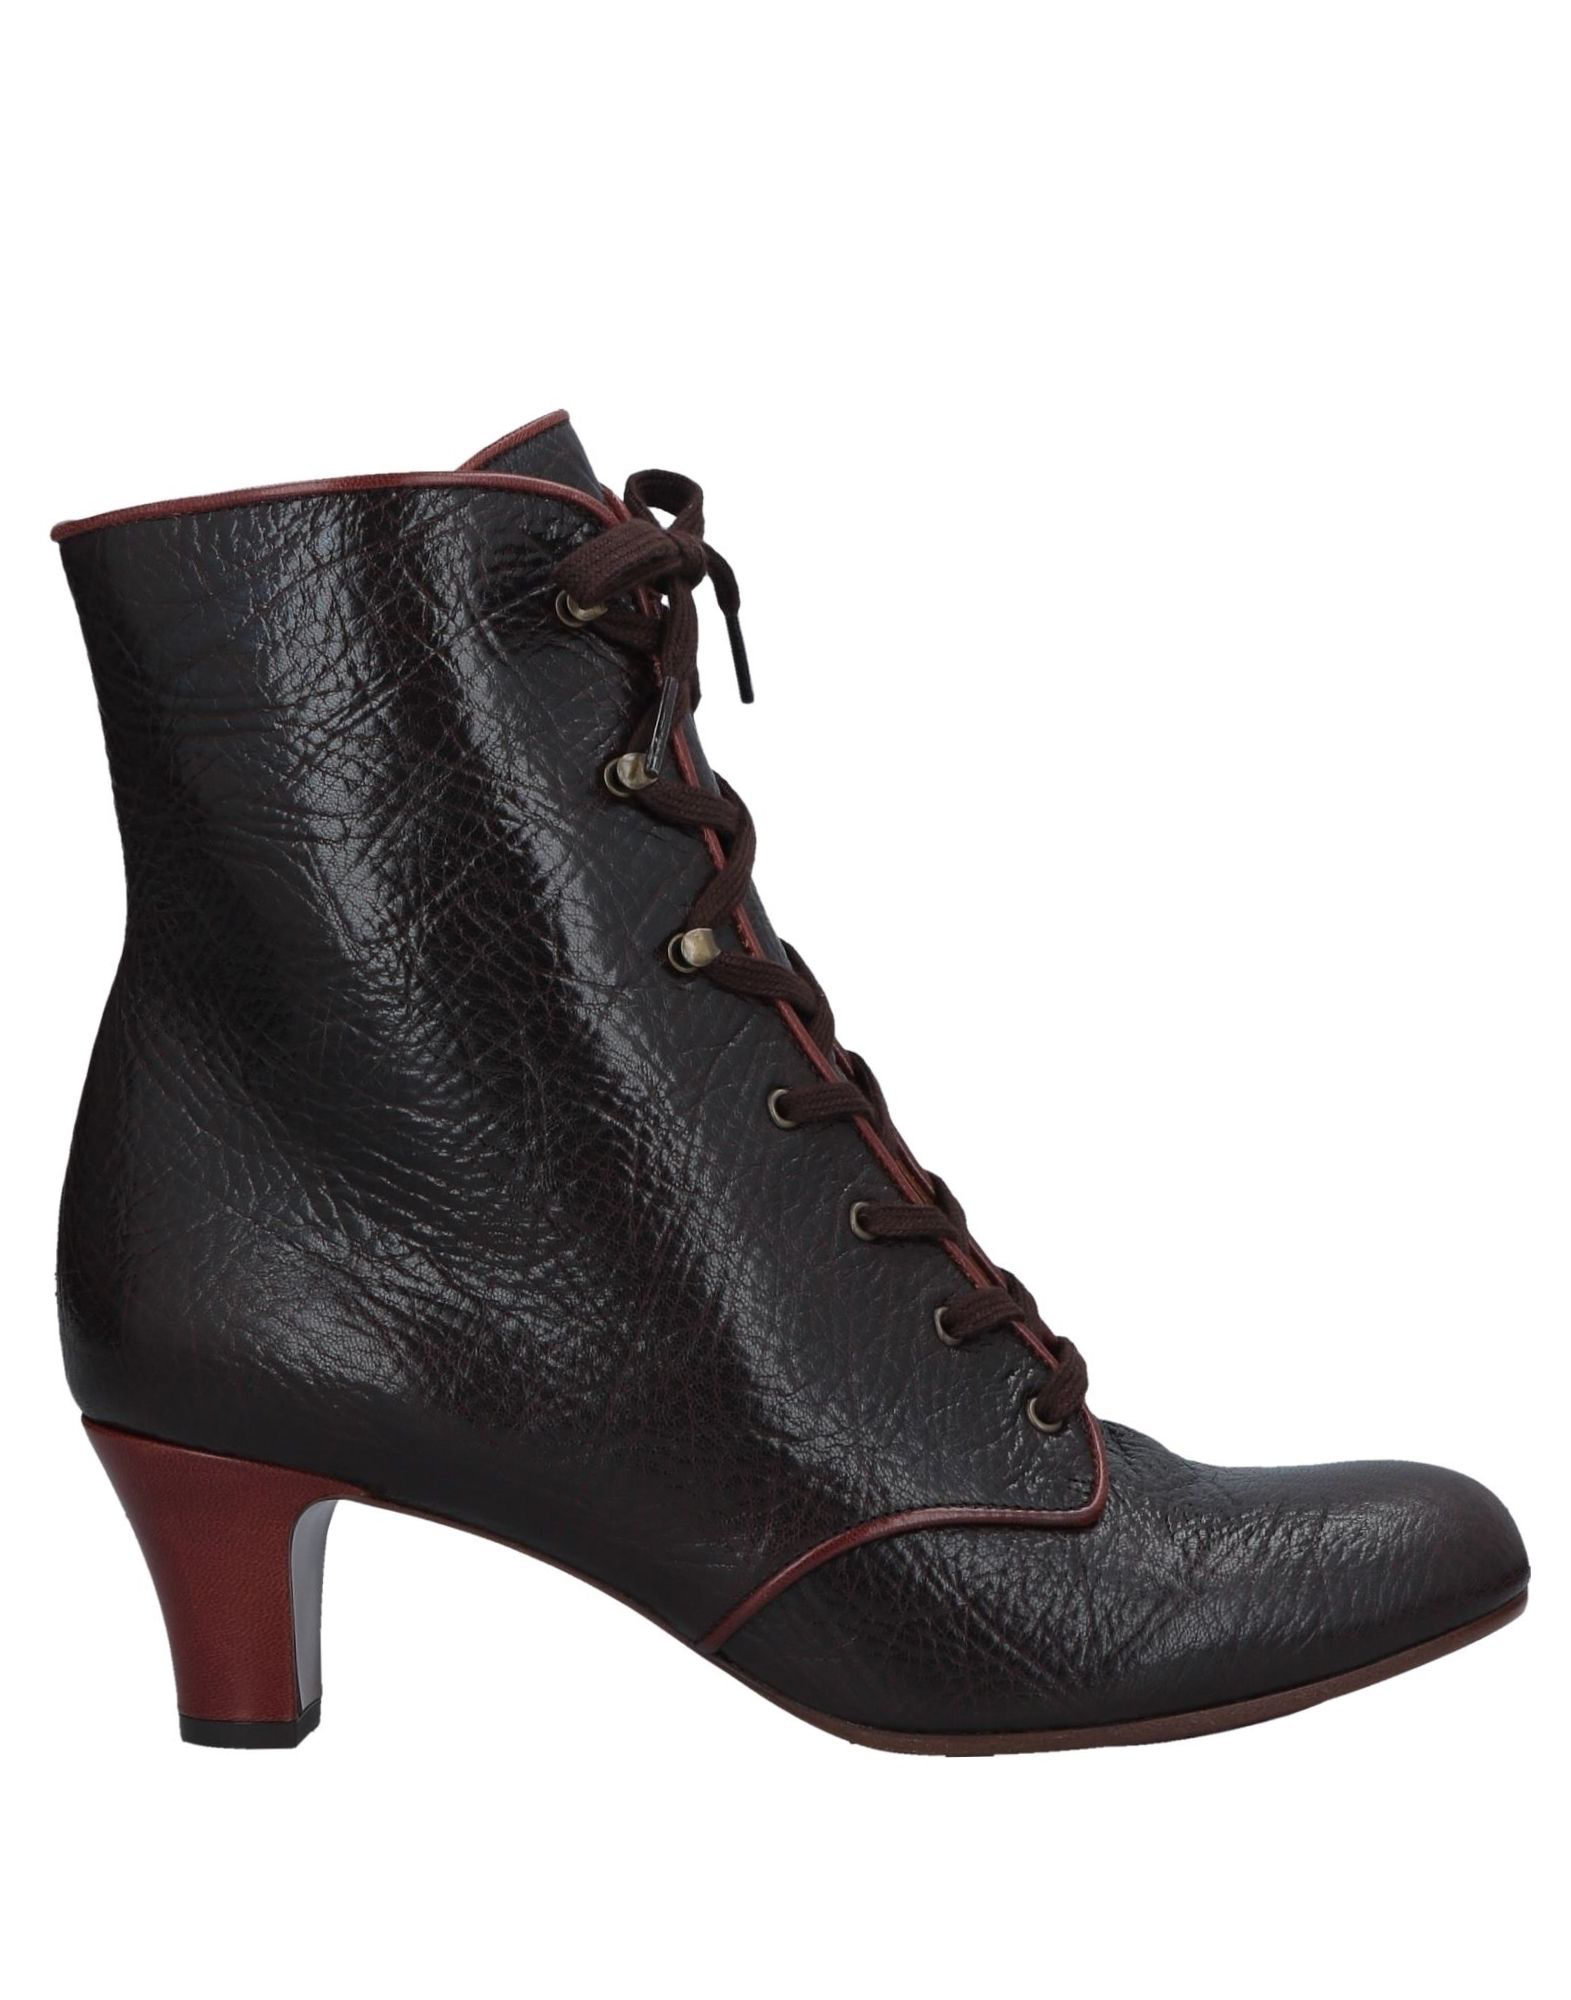 Chie Mihara Ankle Boots In Dark Brown | ModeSens